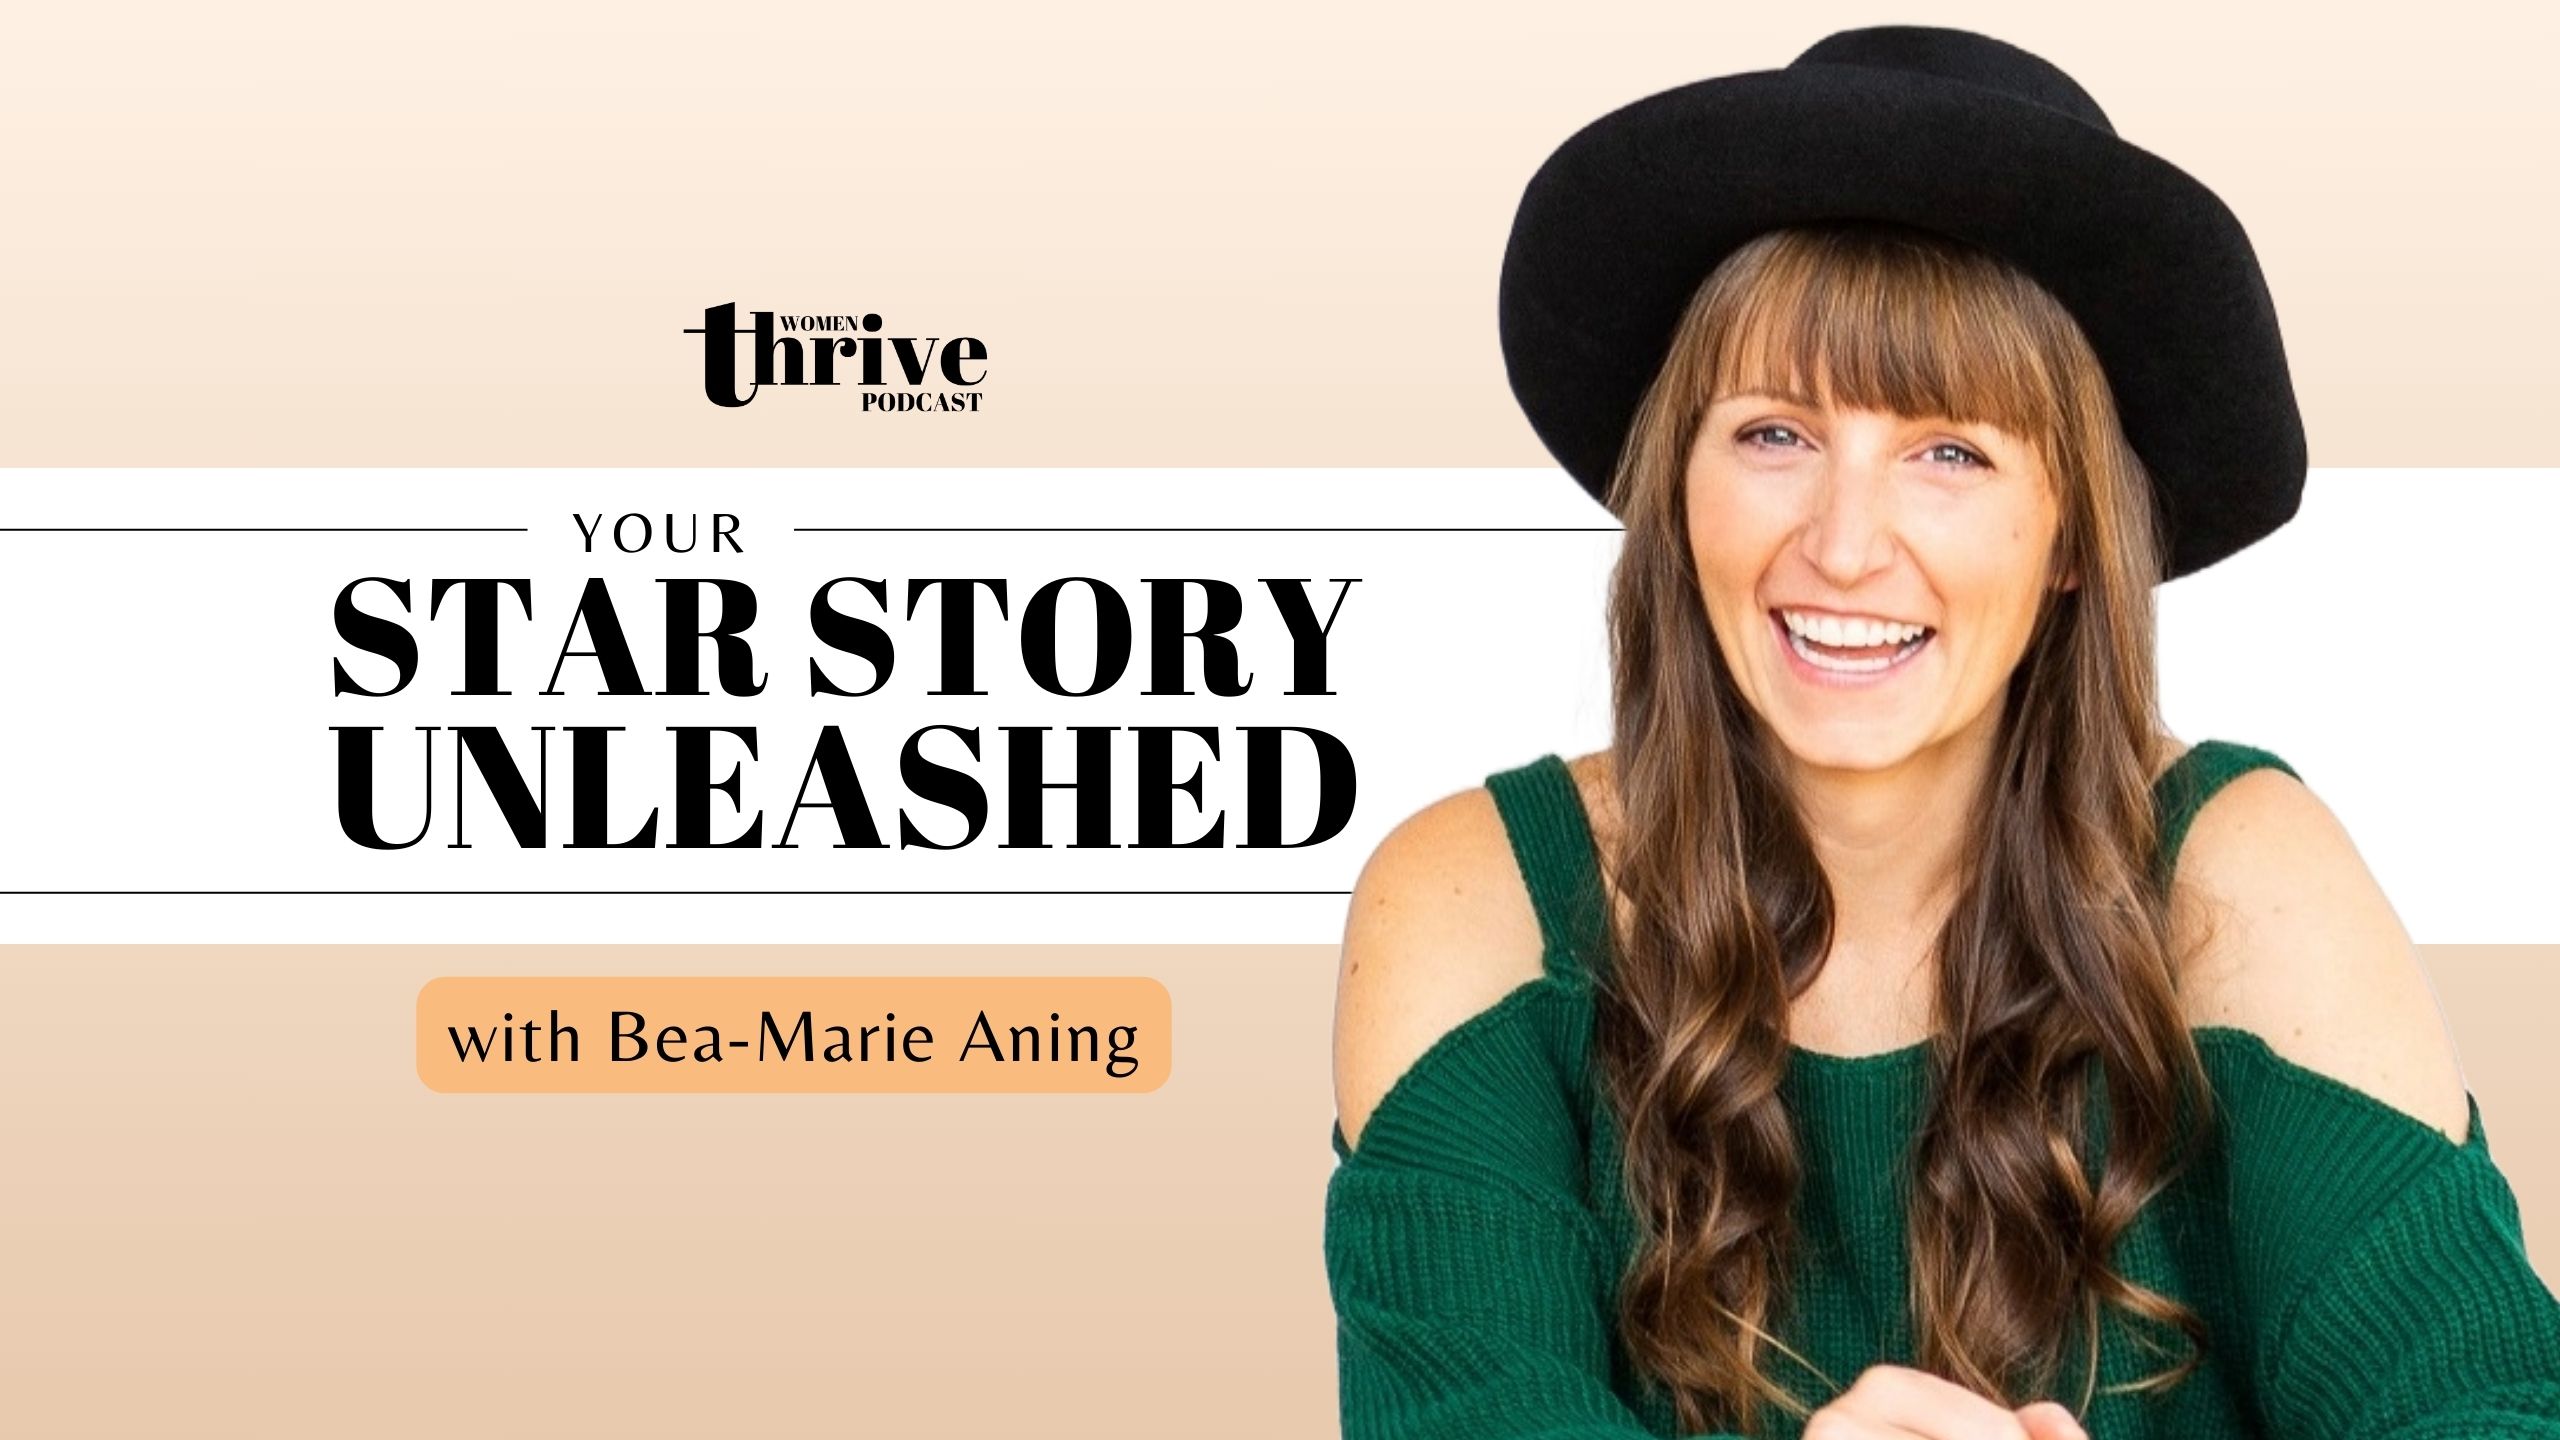 Your Star Story Unleashed with Bea-Marie Aning